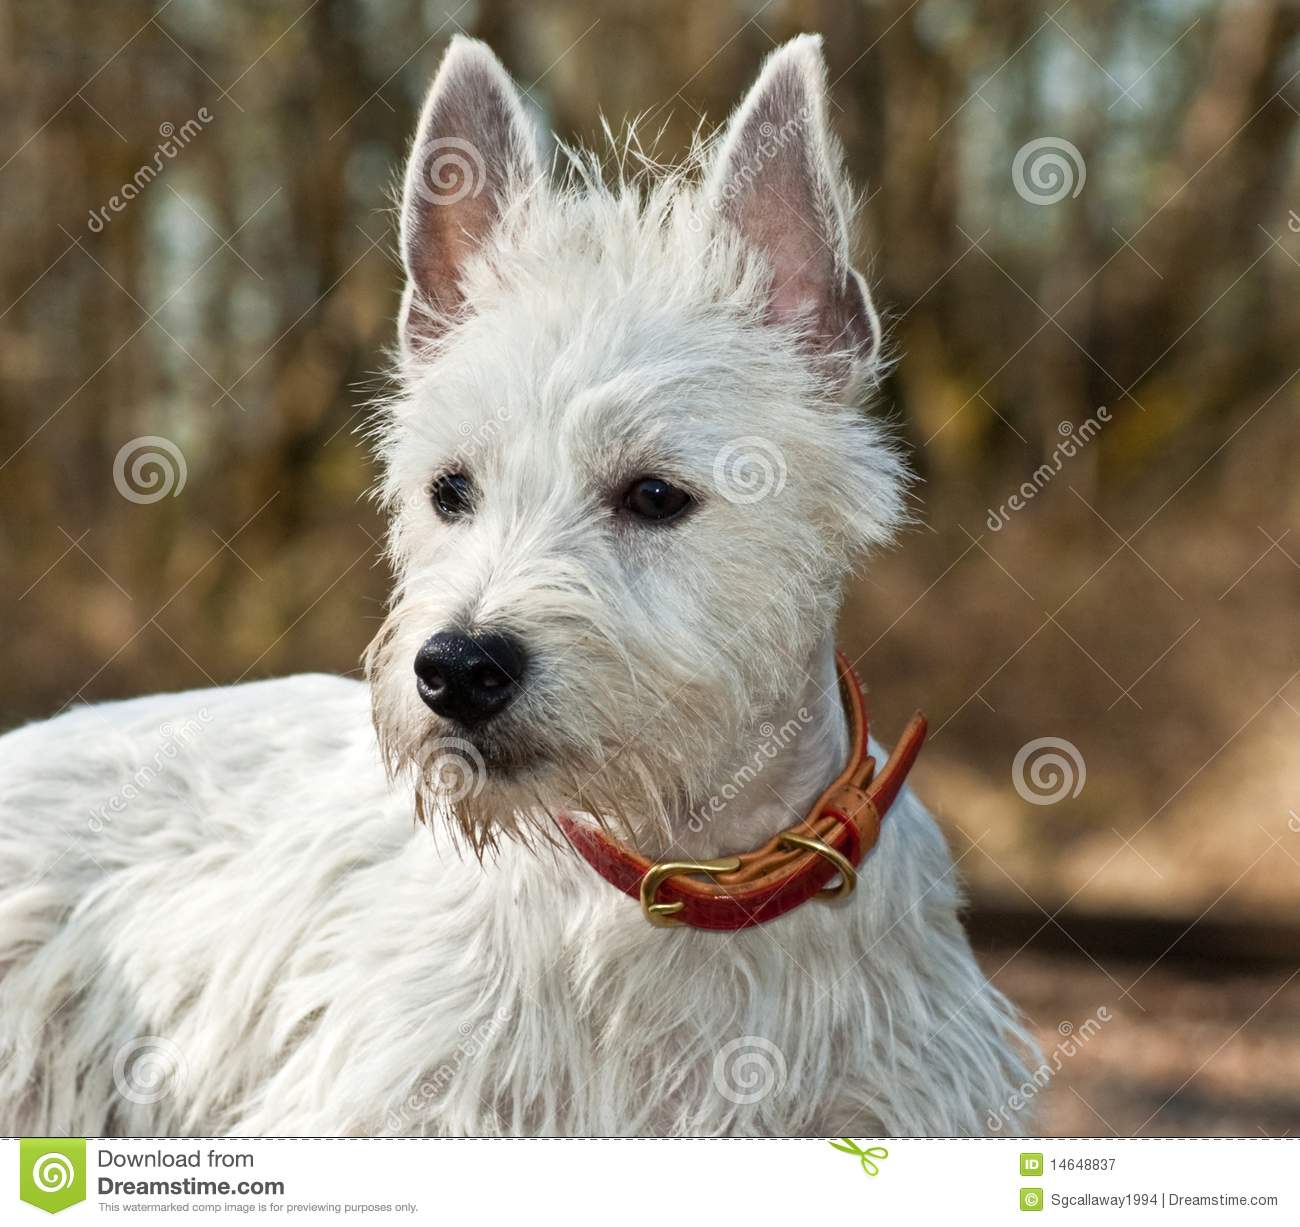 Smalll White Dog Outdoors Royalty Free Stock Photography   Image